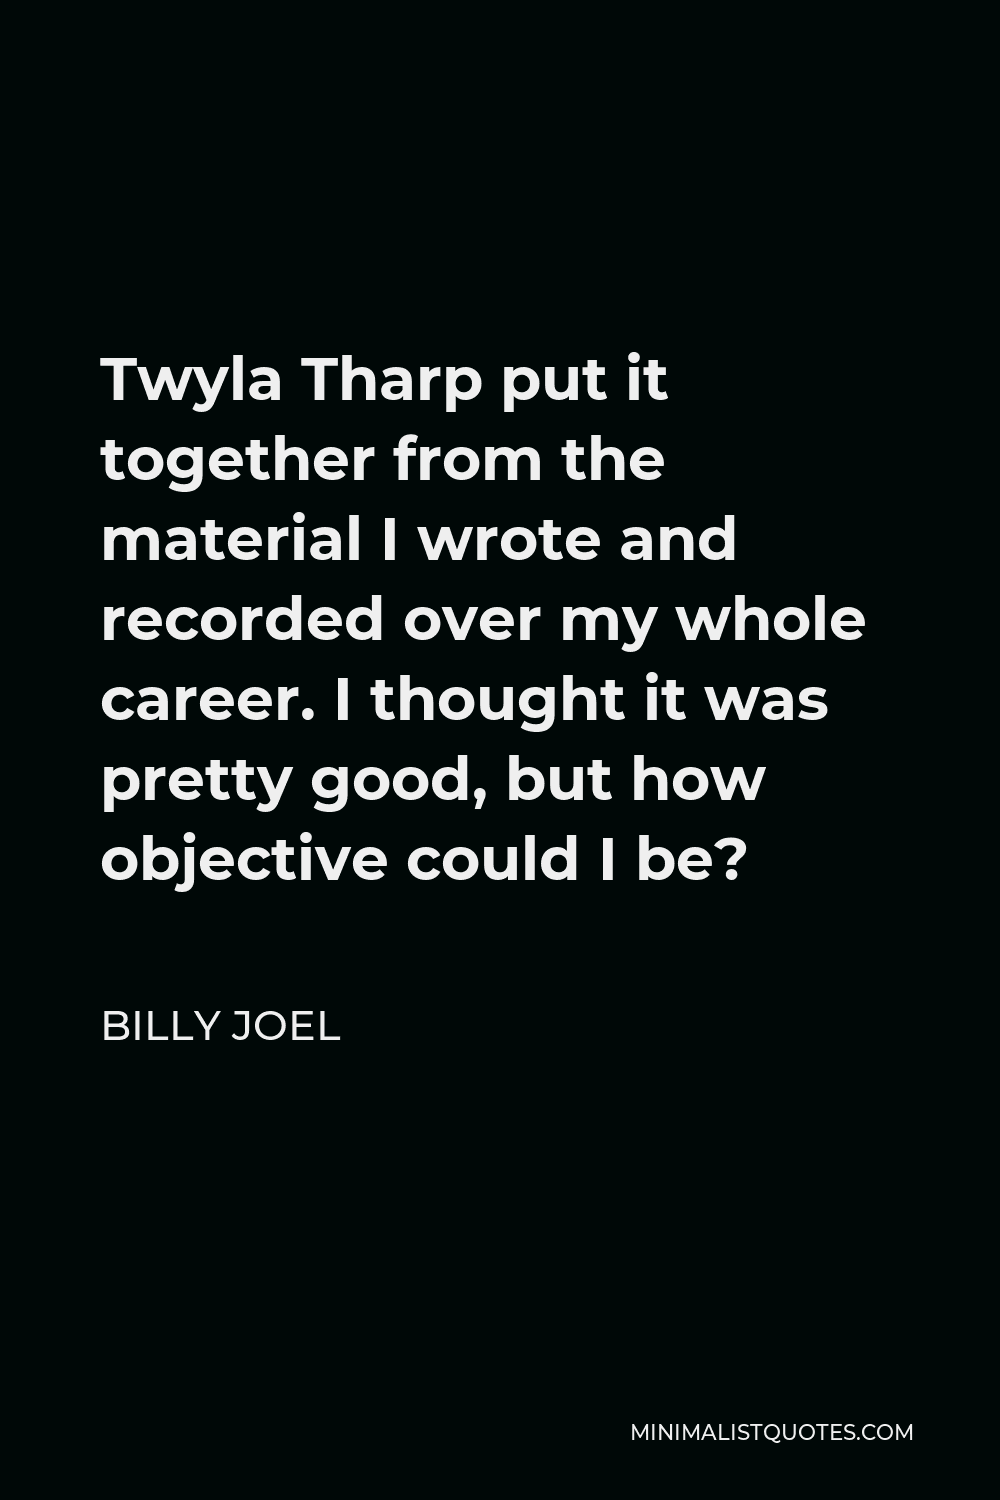 Billy Joel Quote - Twyla Tharp put it together from the material I wrote and recorded over my whole career. I thought it was pretty good, but how objective could I be?